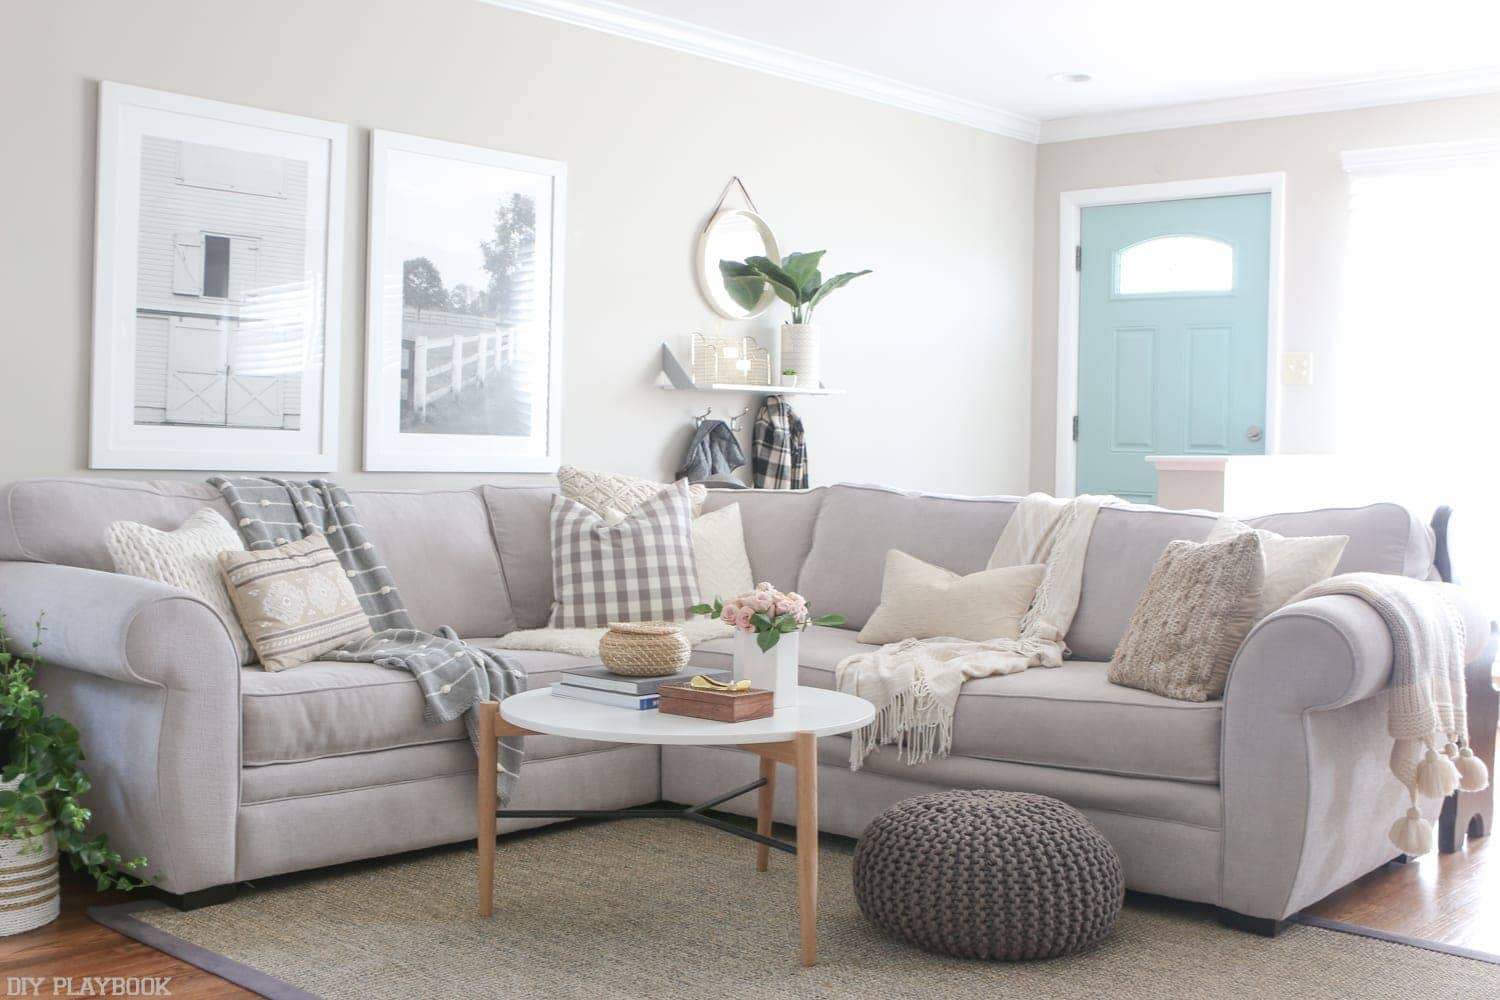 You can use the same approach in your family room. A extra cozy couch paired with a sleek coffee table is a fantastic option.